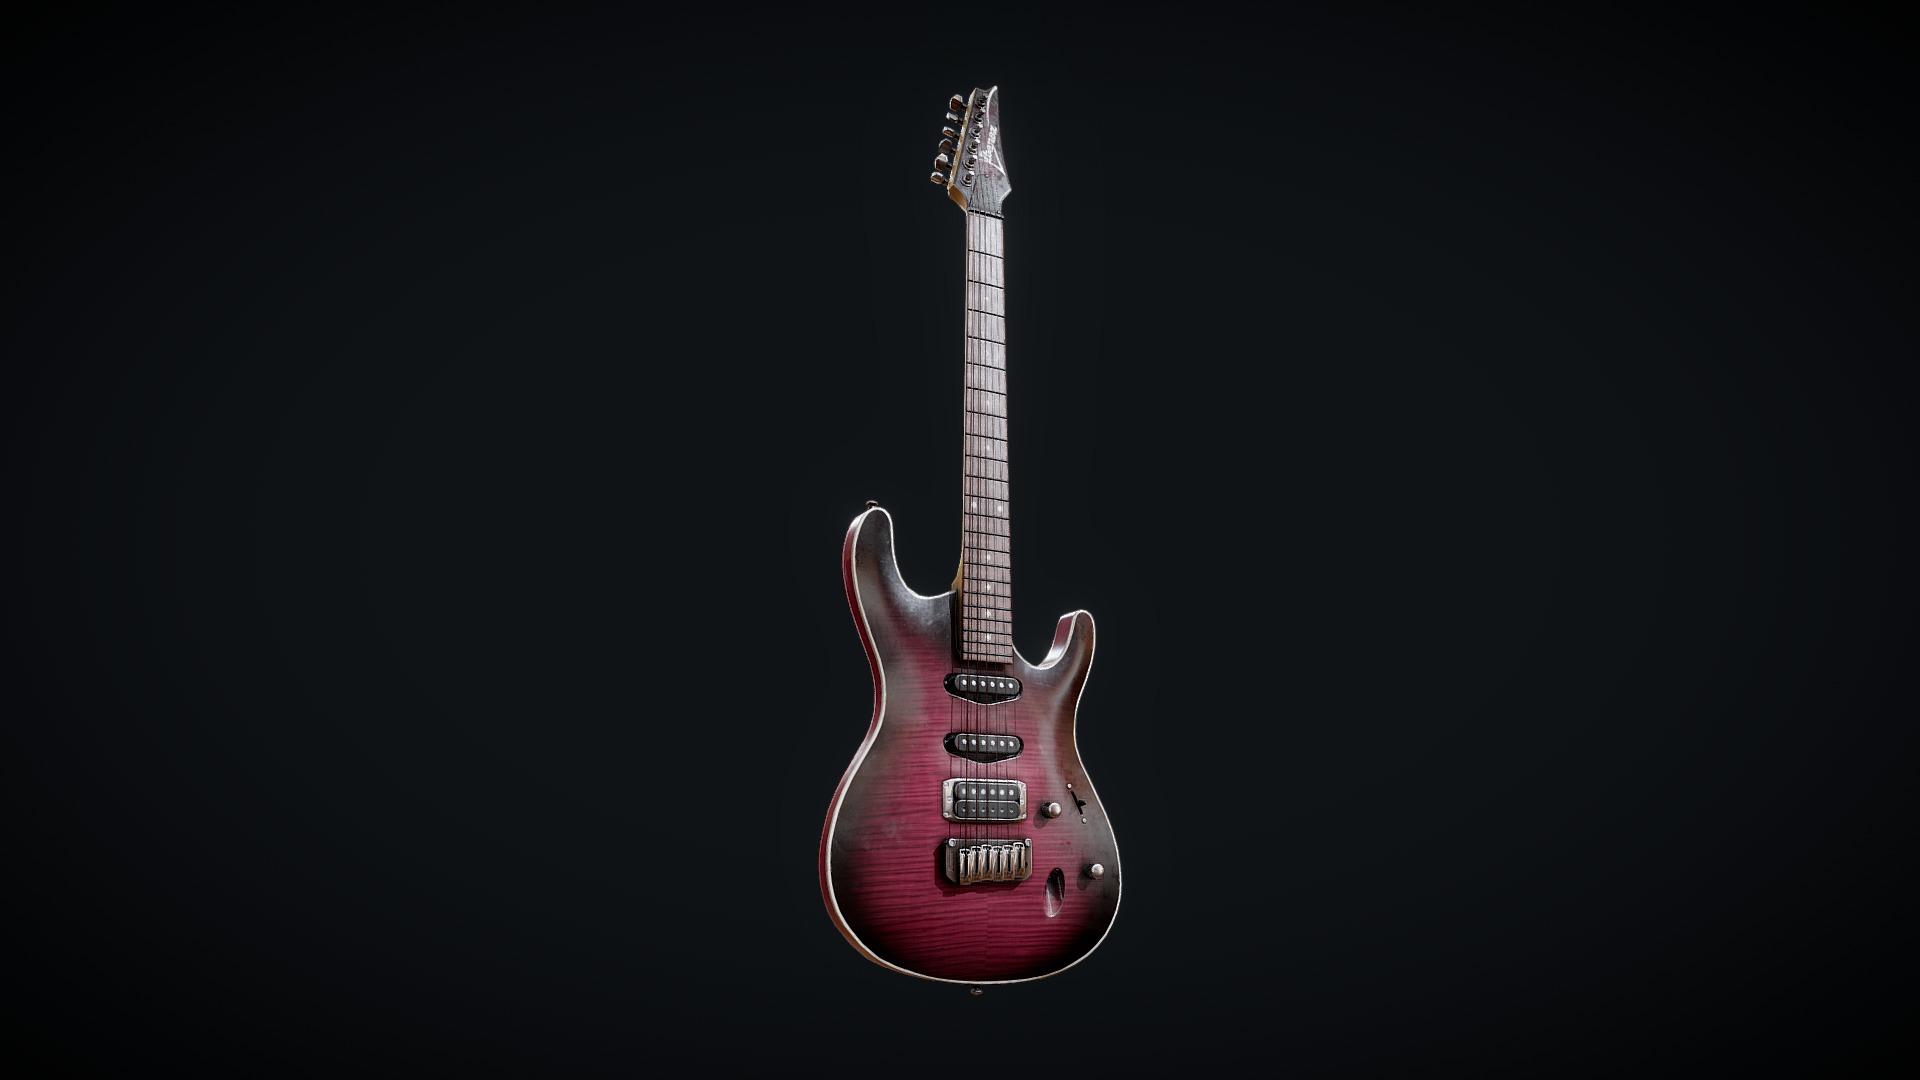 3D model Ibanez sa240fm - This is a 3D model of the Ibanez sa240fm. The 3D model is about a red electric guitar.